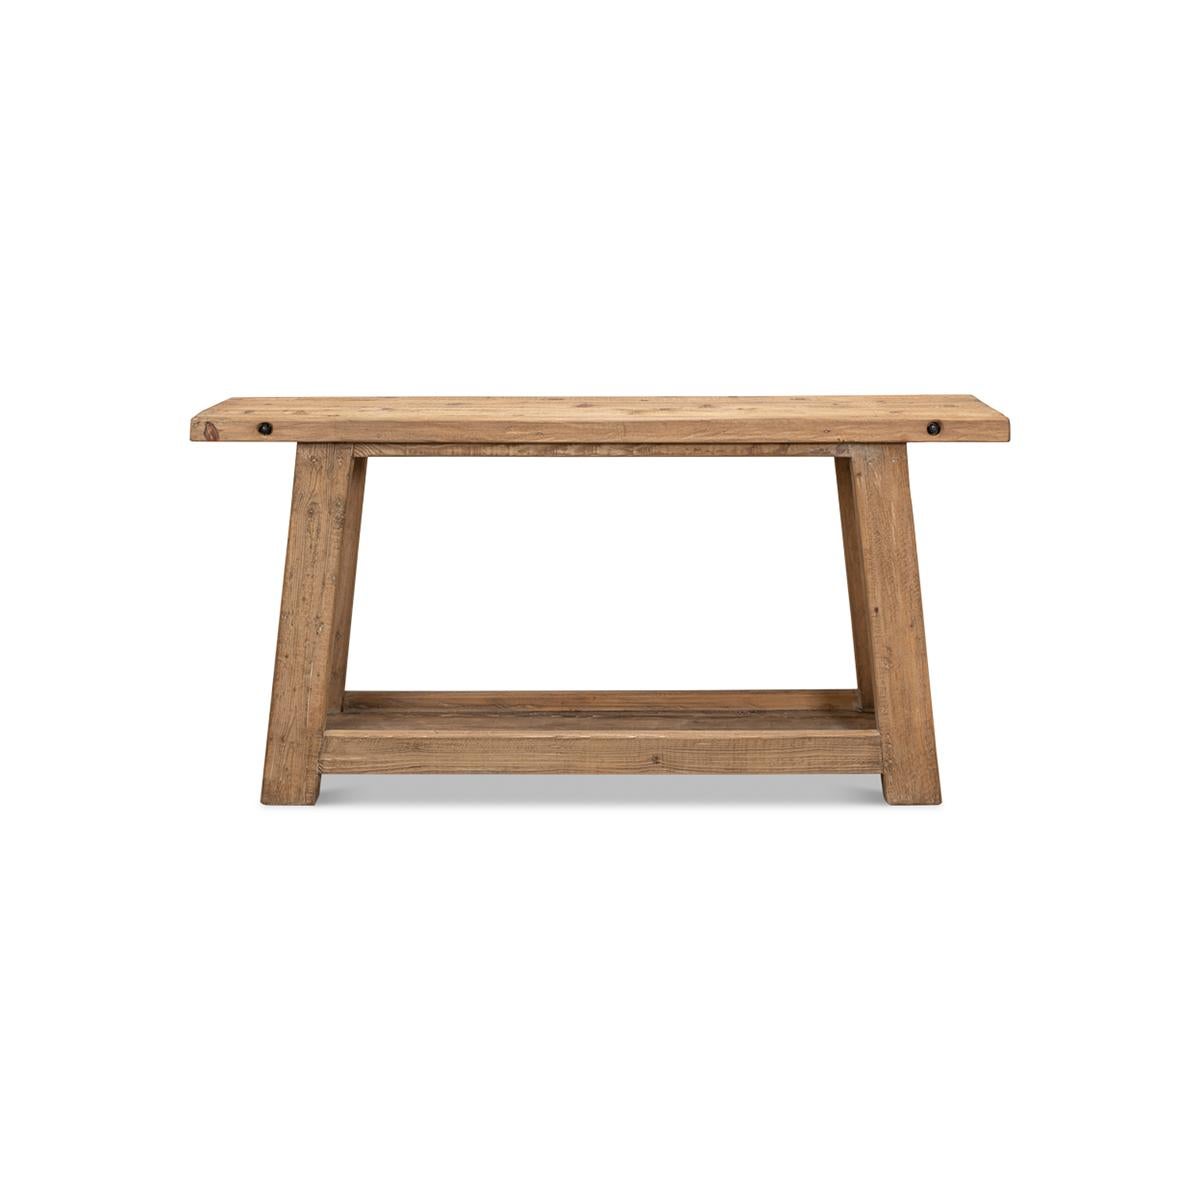 Farmhouse Console is made with reclaimed solid pine in a natural finish. The planked top is raised on an angled four-leg base with a shelf stretcher.

Dimensions: 68